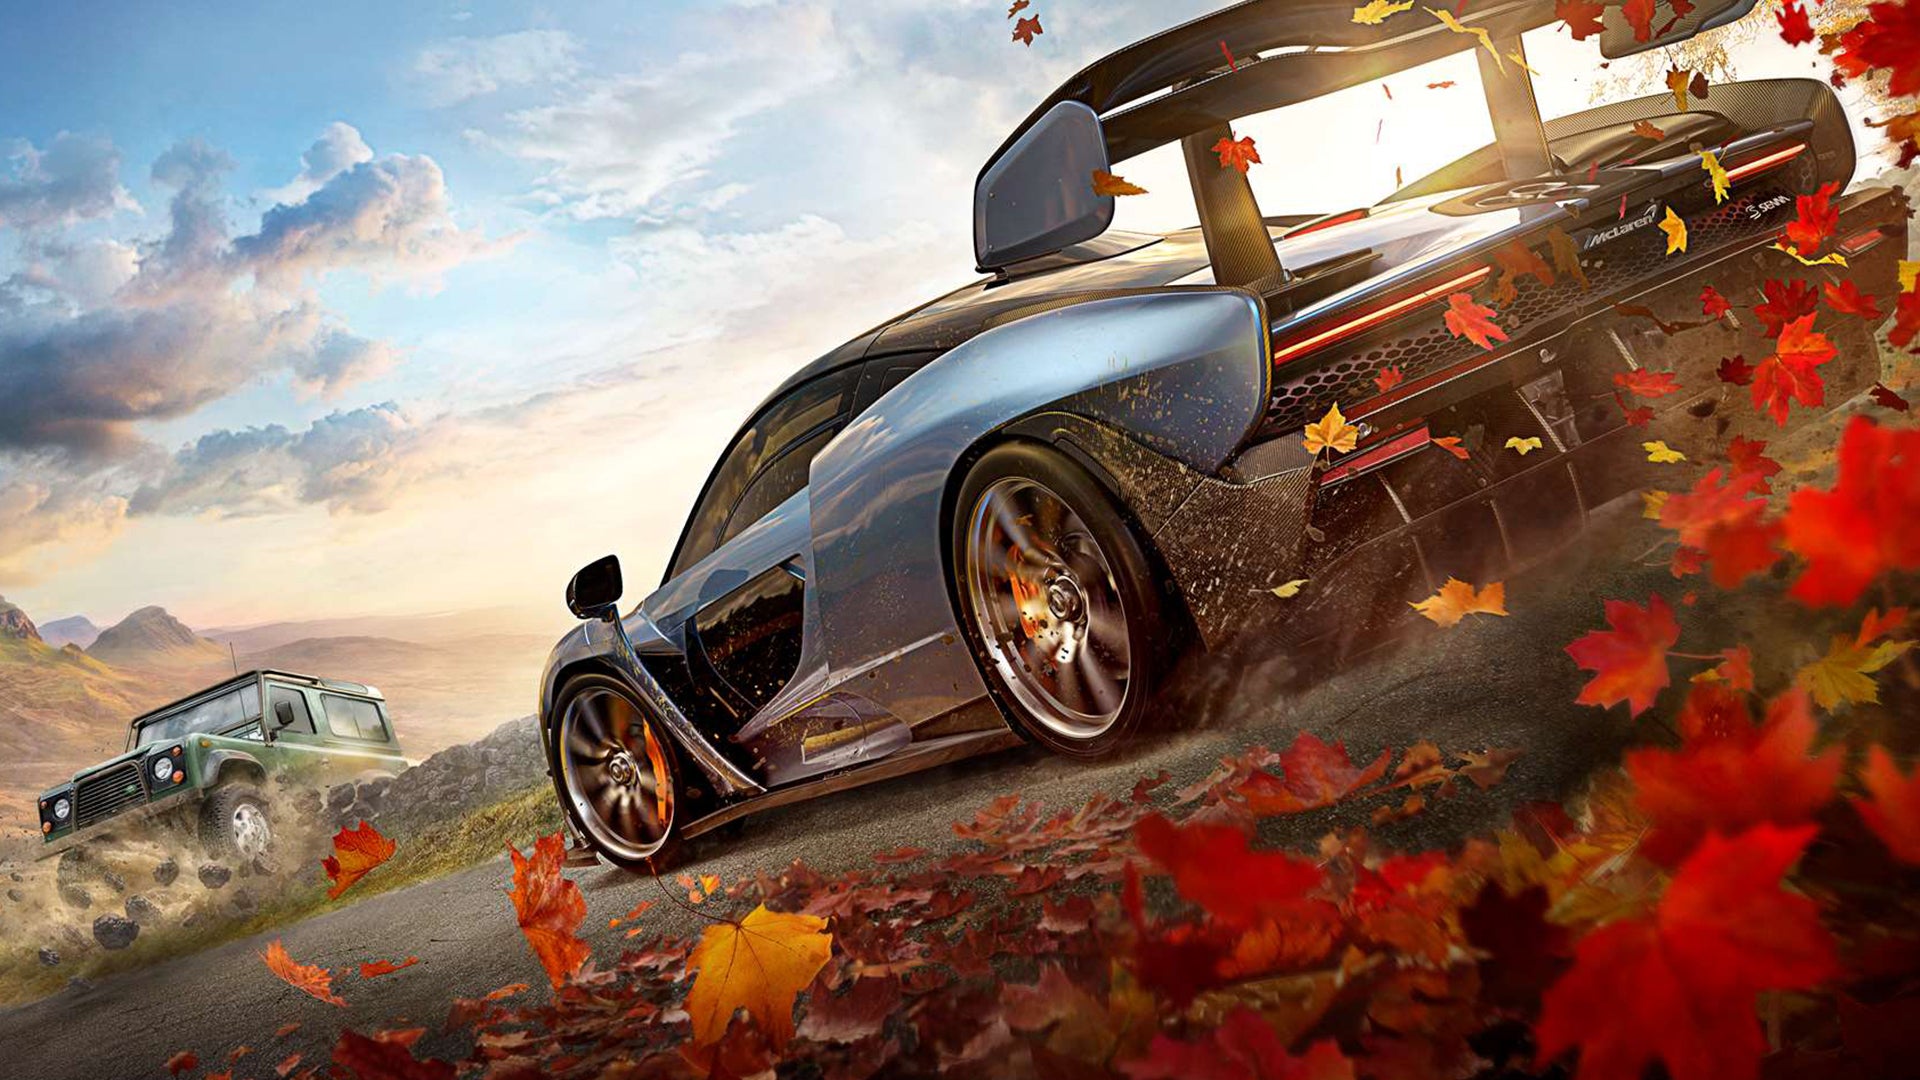 Image for Forza Horizon 4 Xbox One X: 1080p60 or 4K30 - You Decide!